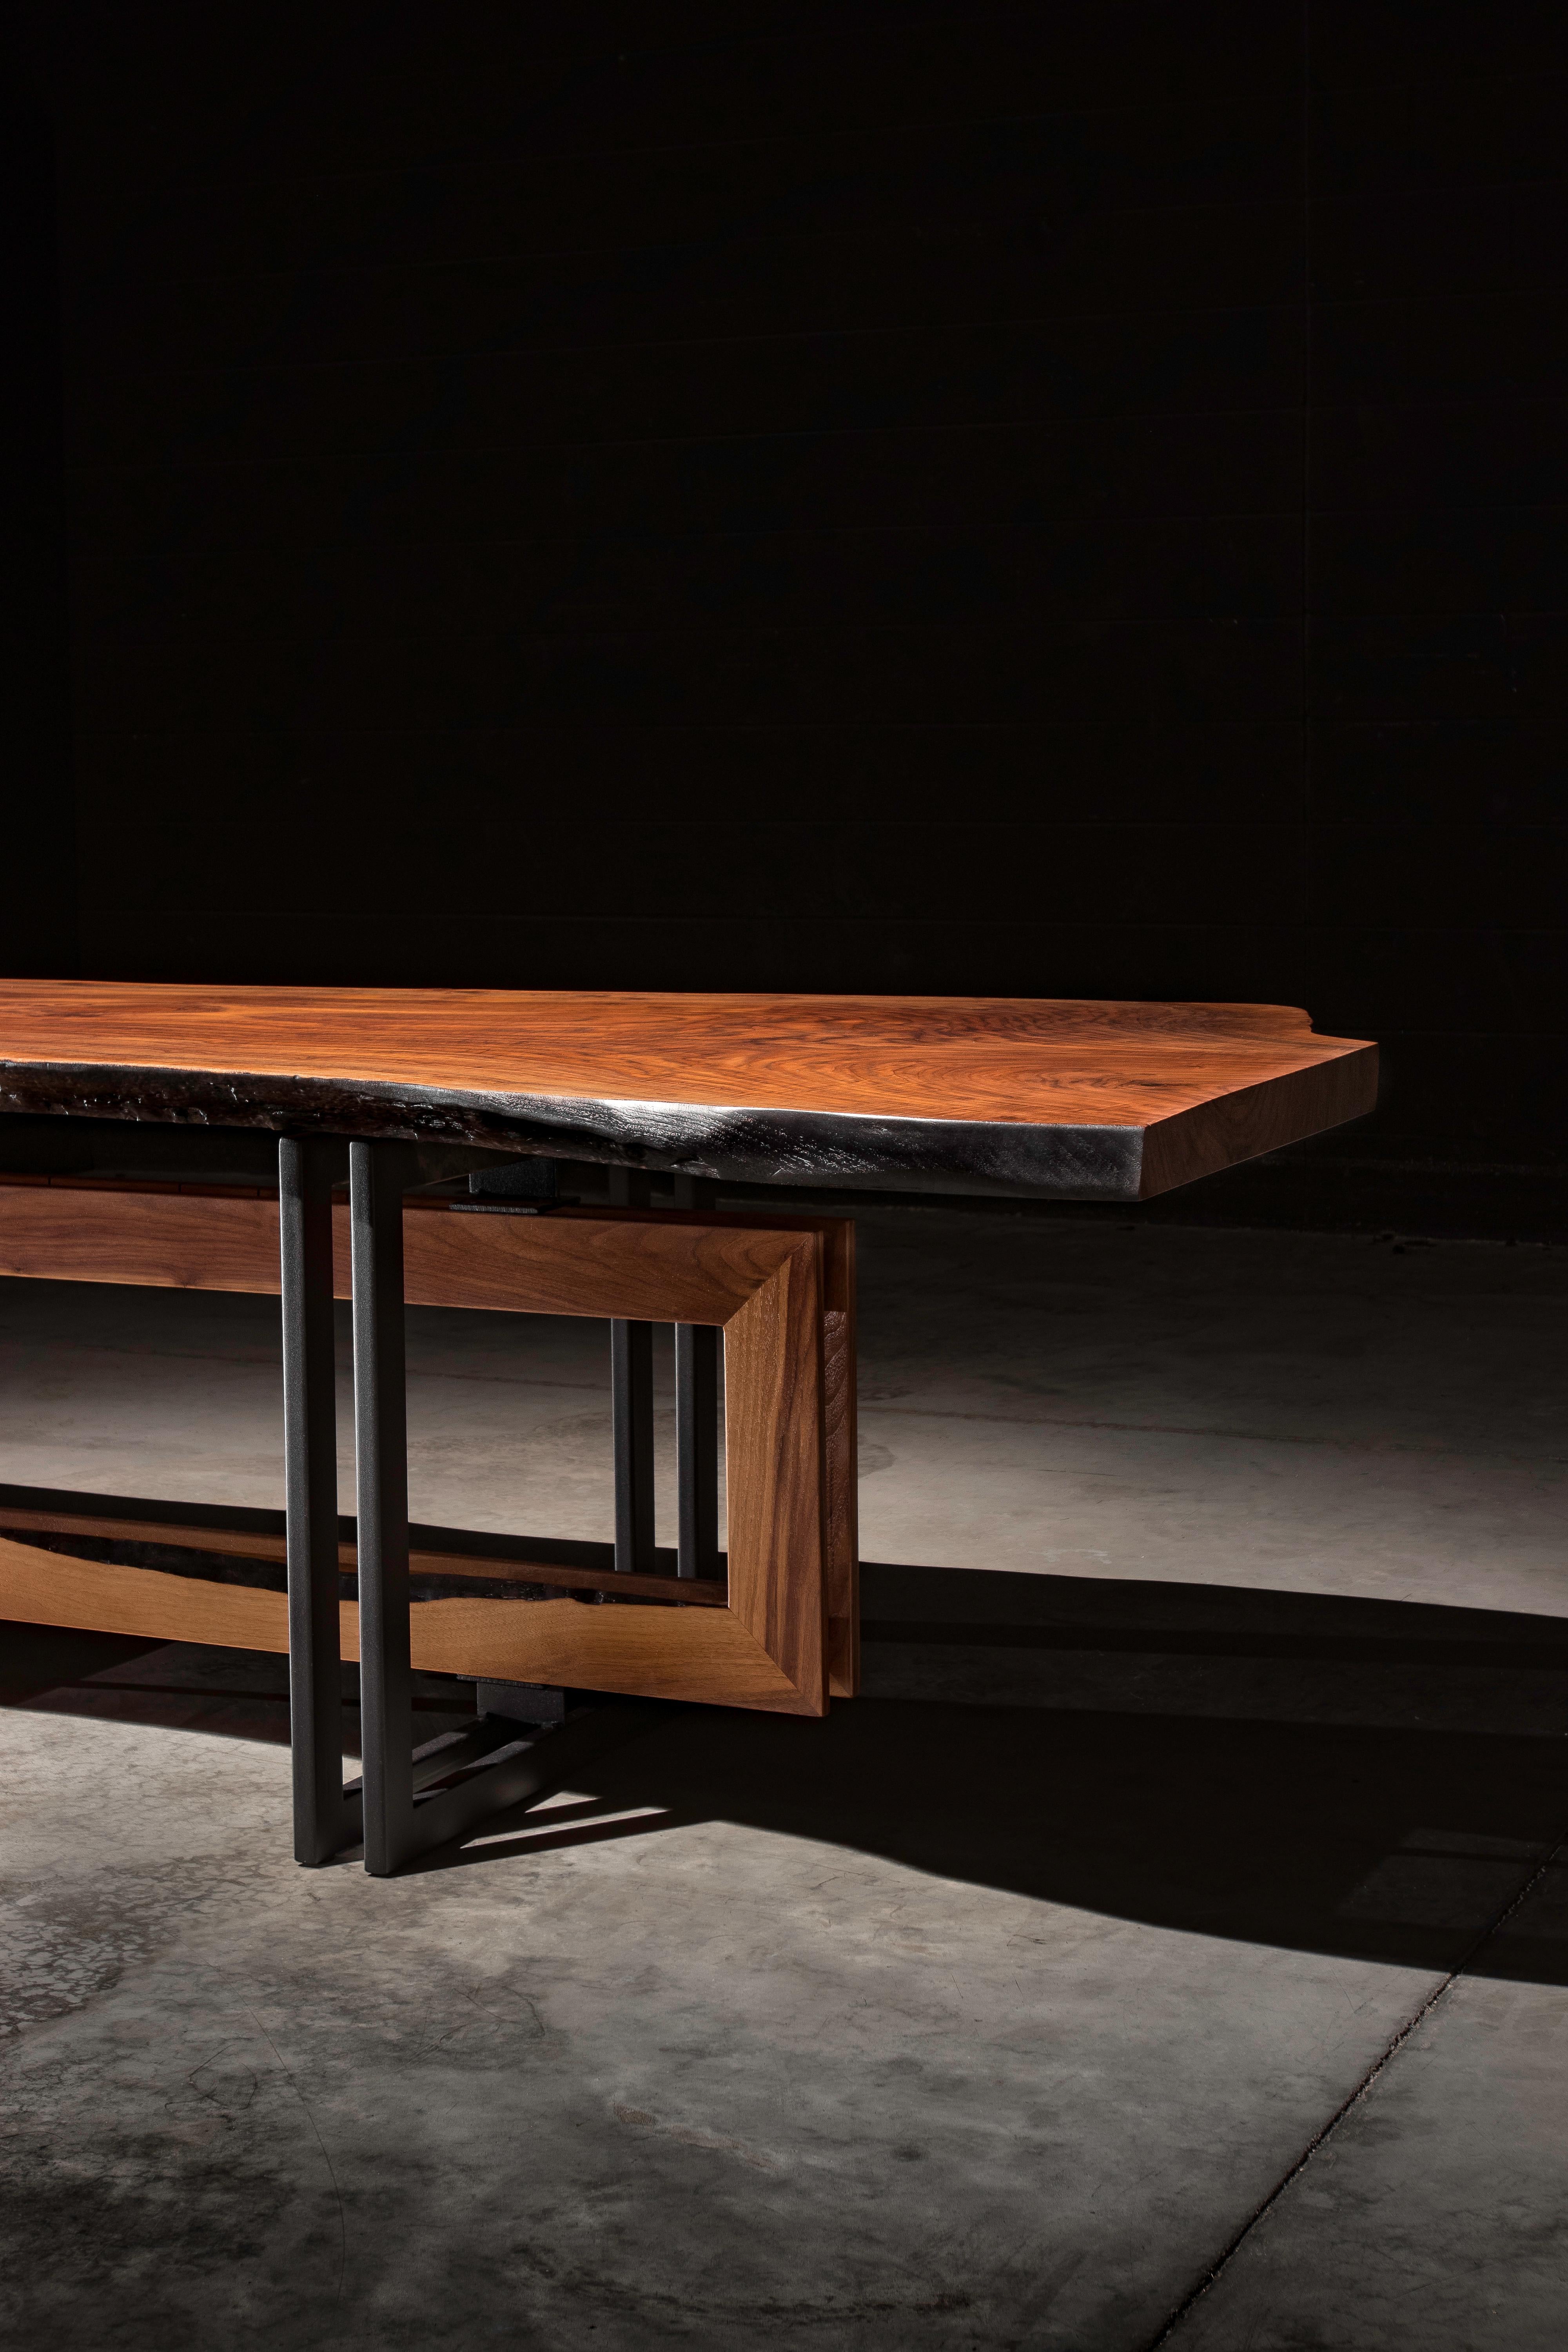 The alter dining table mixes the natural wood grain of a solid a walnut slab and the modern geometric elements of a blackened steel and walnut base to form an item that will make a statement to any dining room.

This is a made to order item